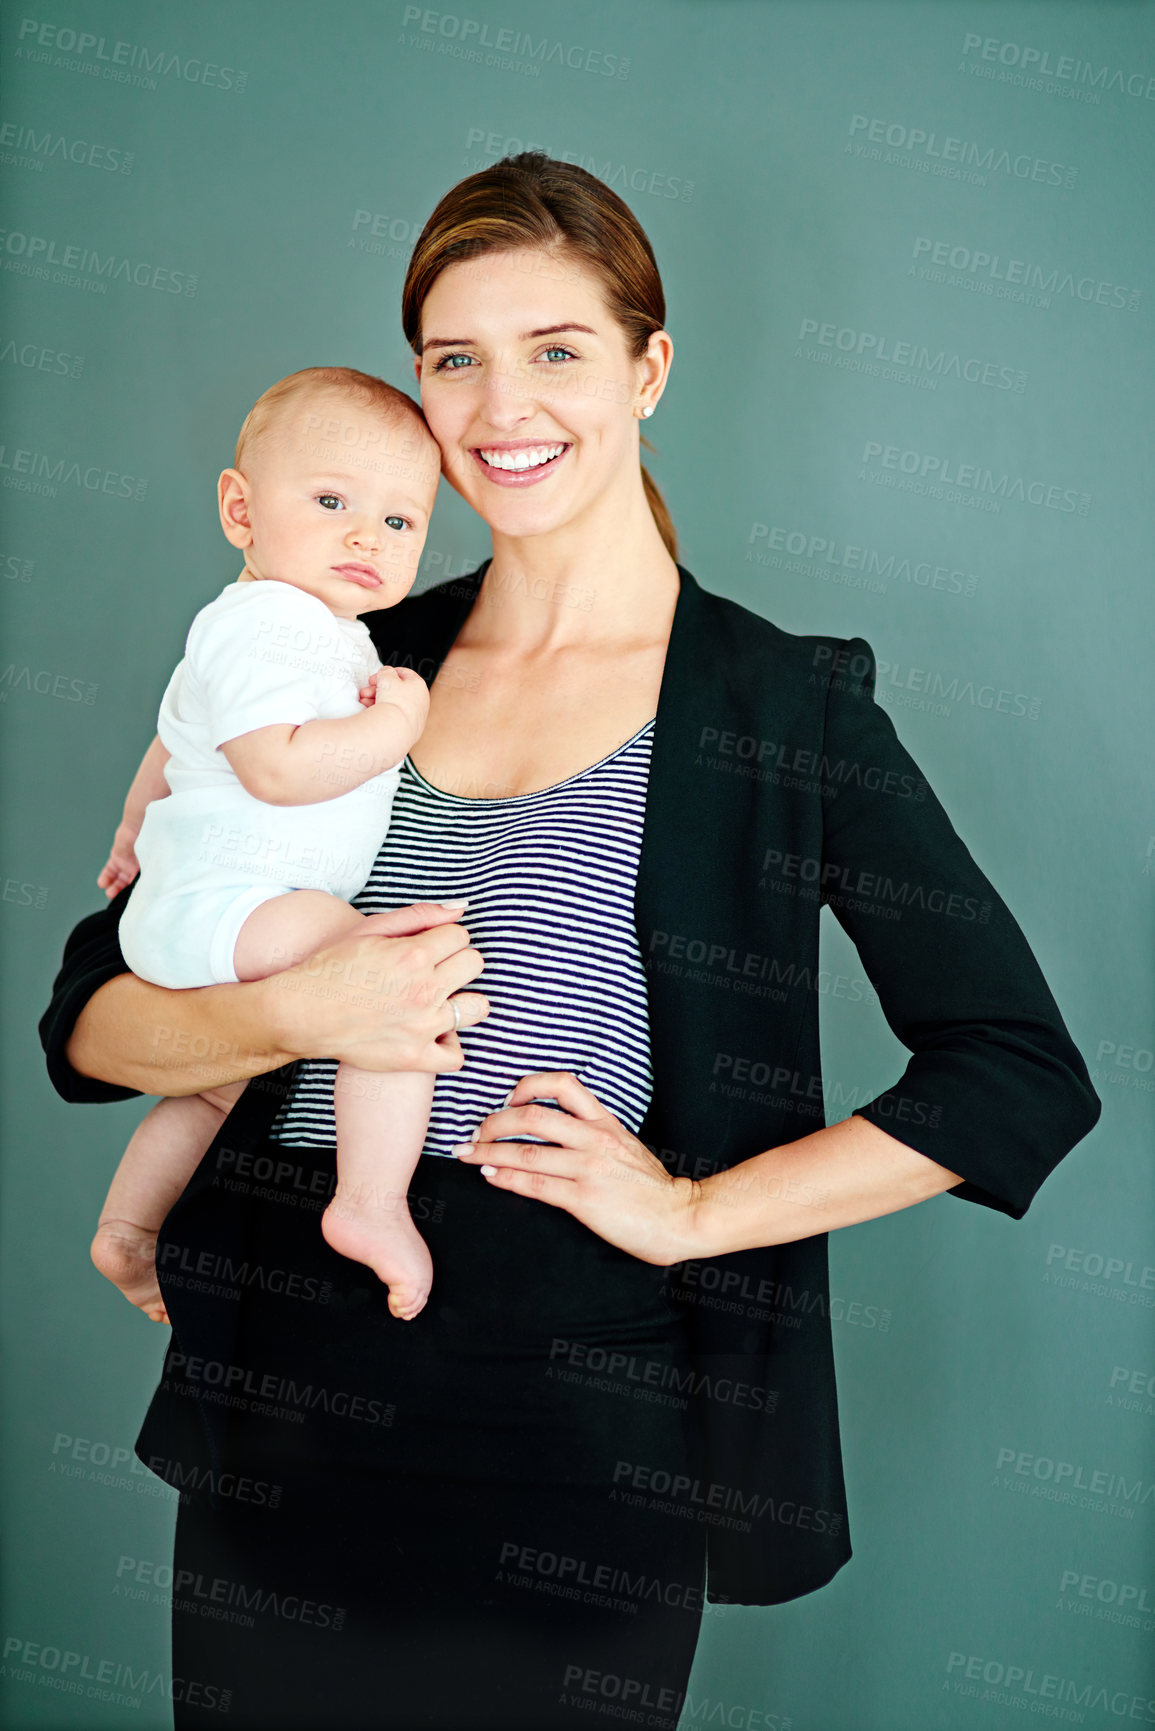 Buy stock photo Studio shot of a successful young businesswoman carrying her adorable baby boy